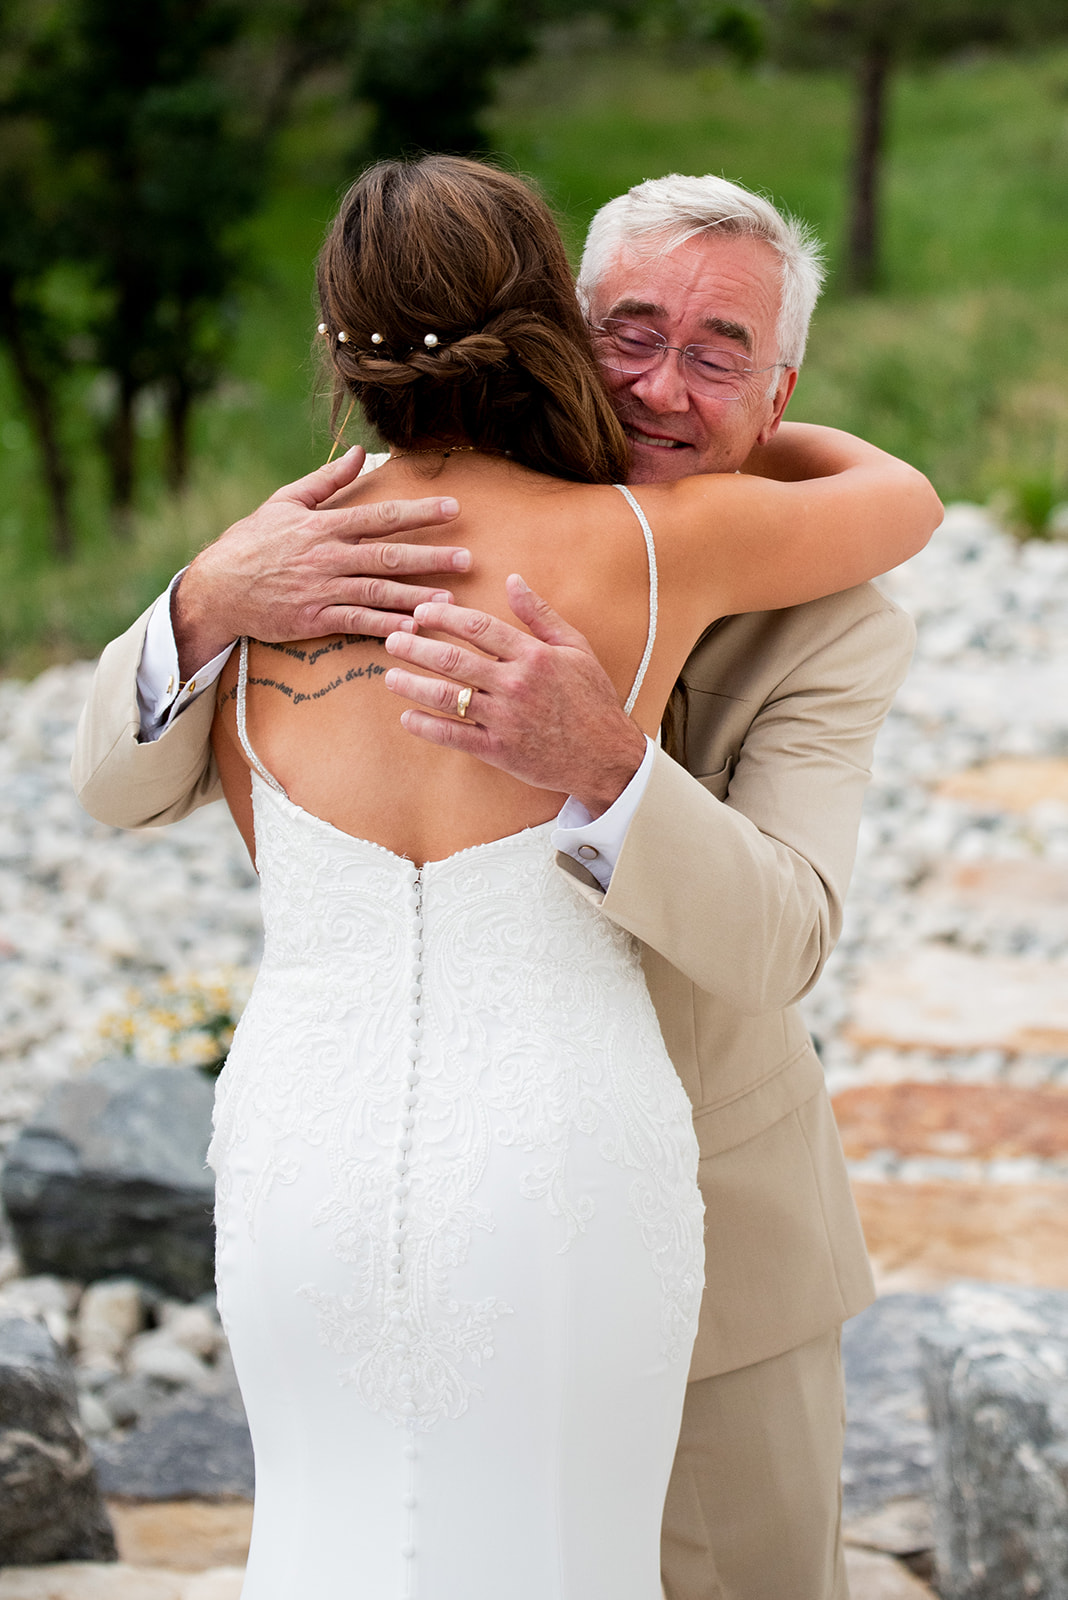 Bride and her father share a hug before the ceremony.